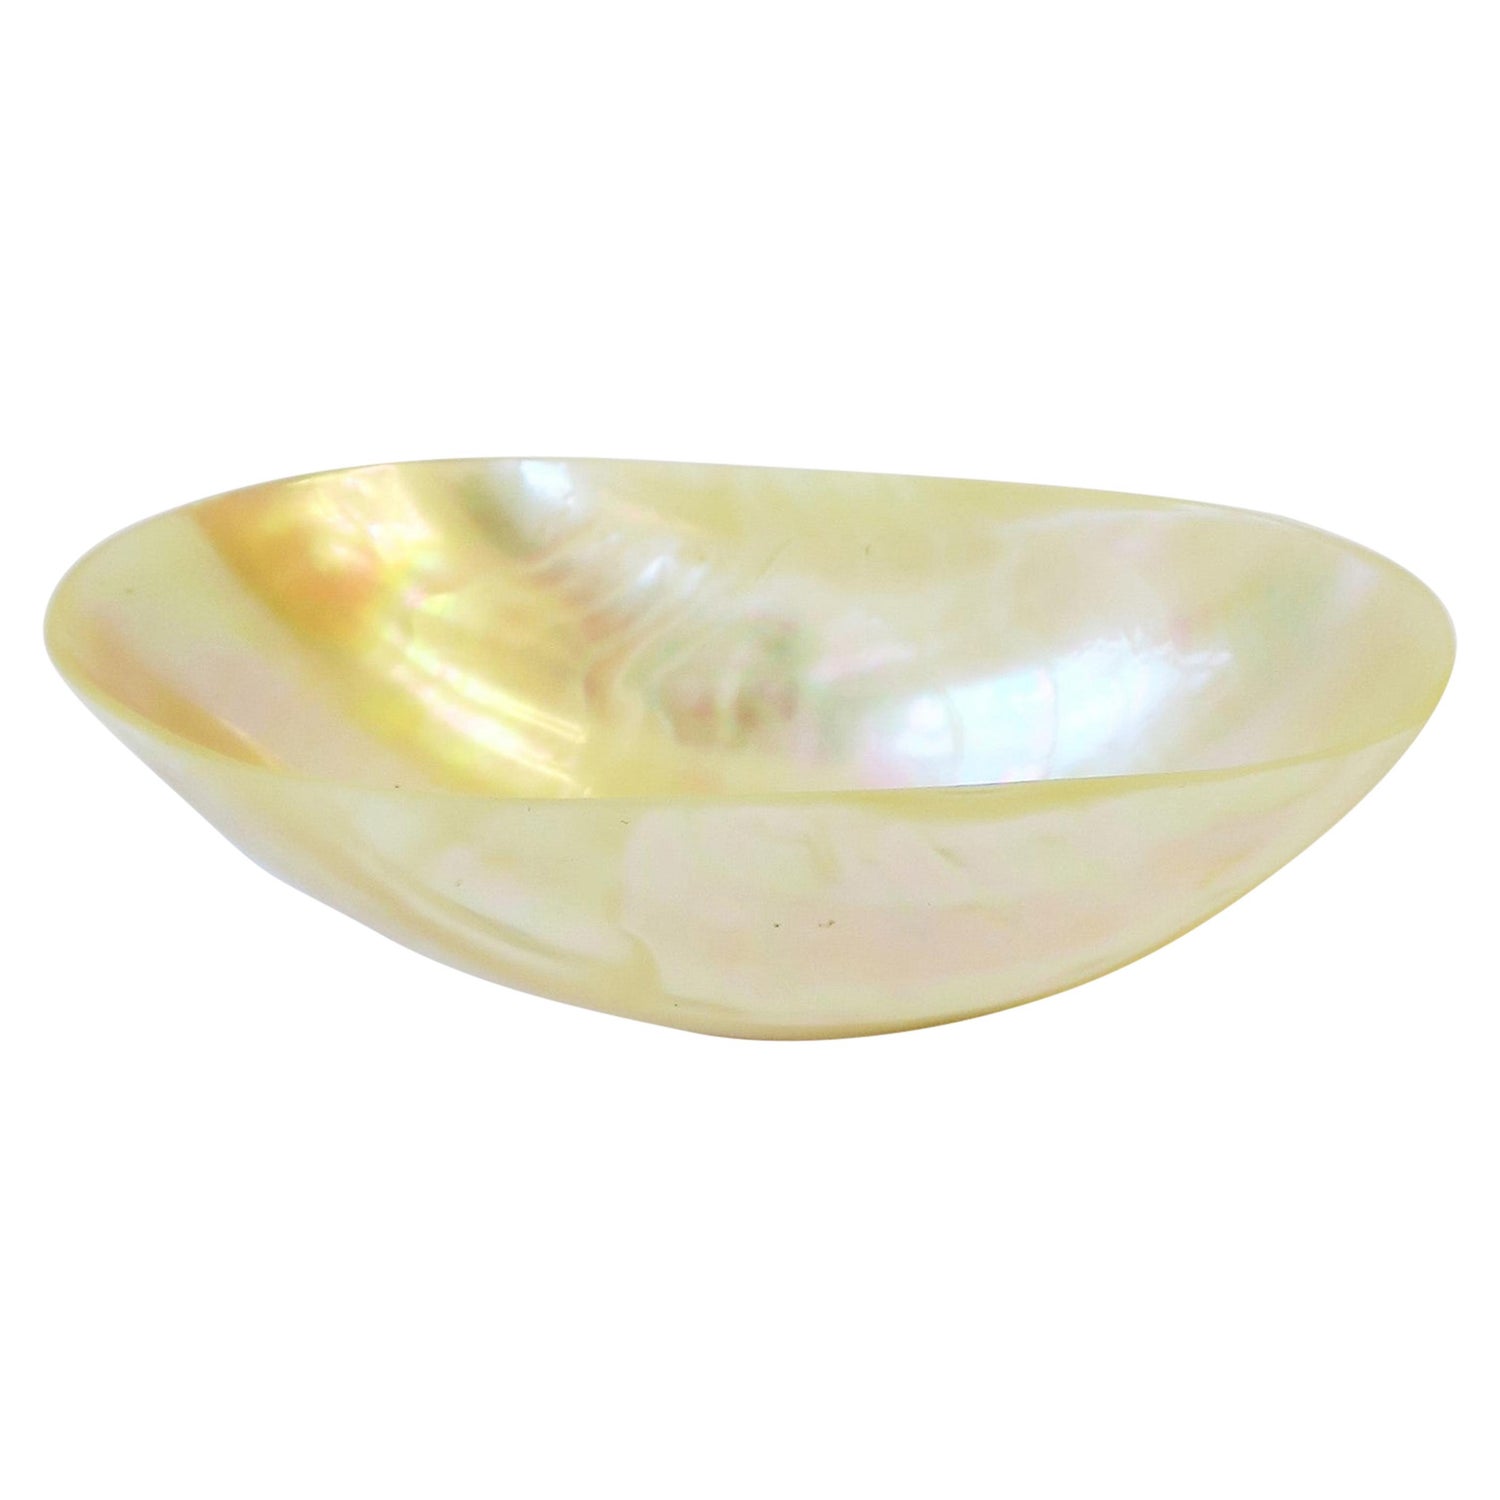 12 PCS GOLDEN POLISHED MOTHER OF PEARL SEA SHELL CAVIAR SERVING #7055 